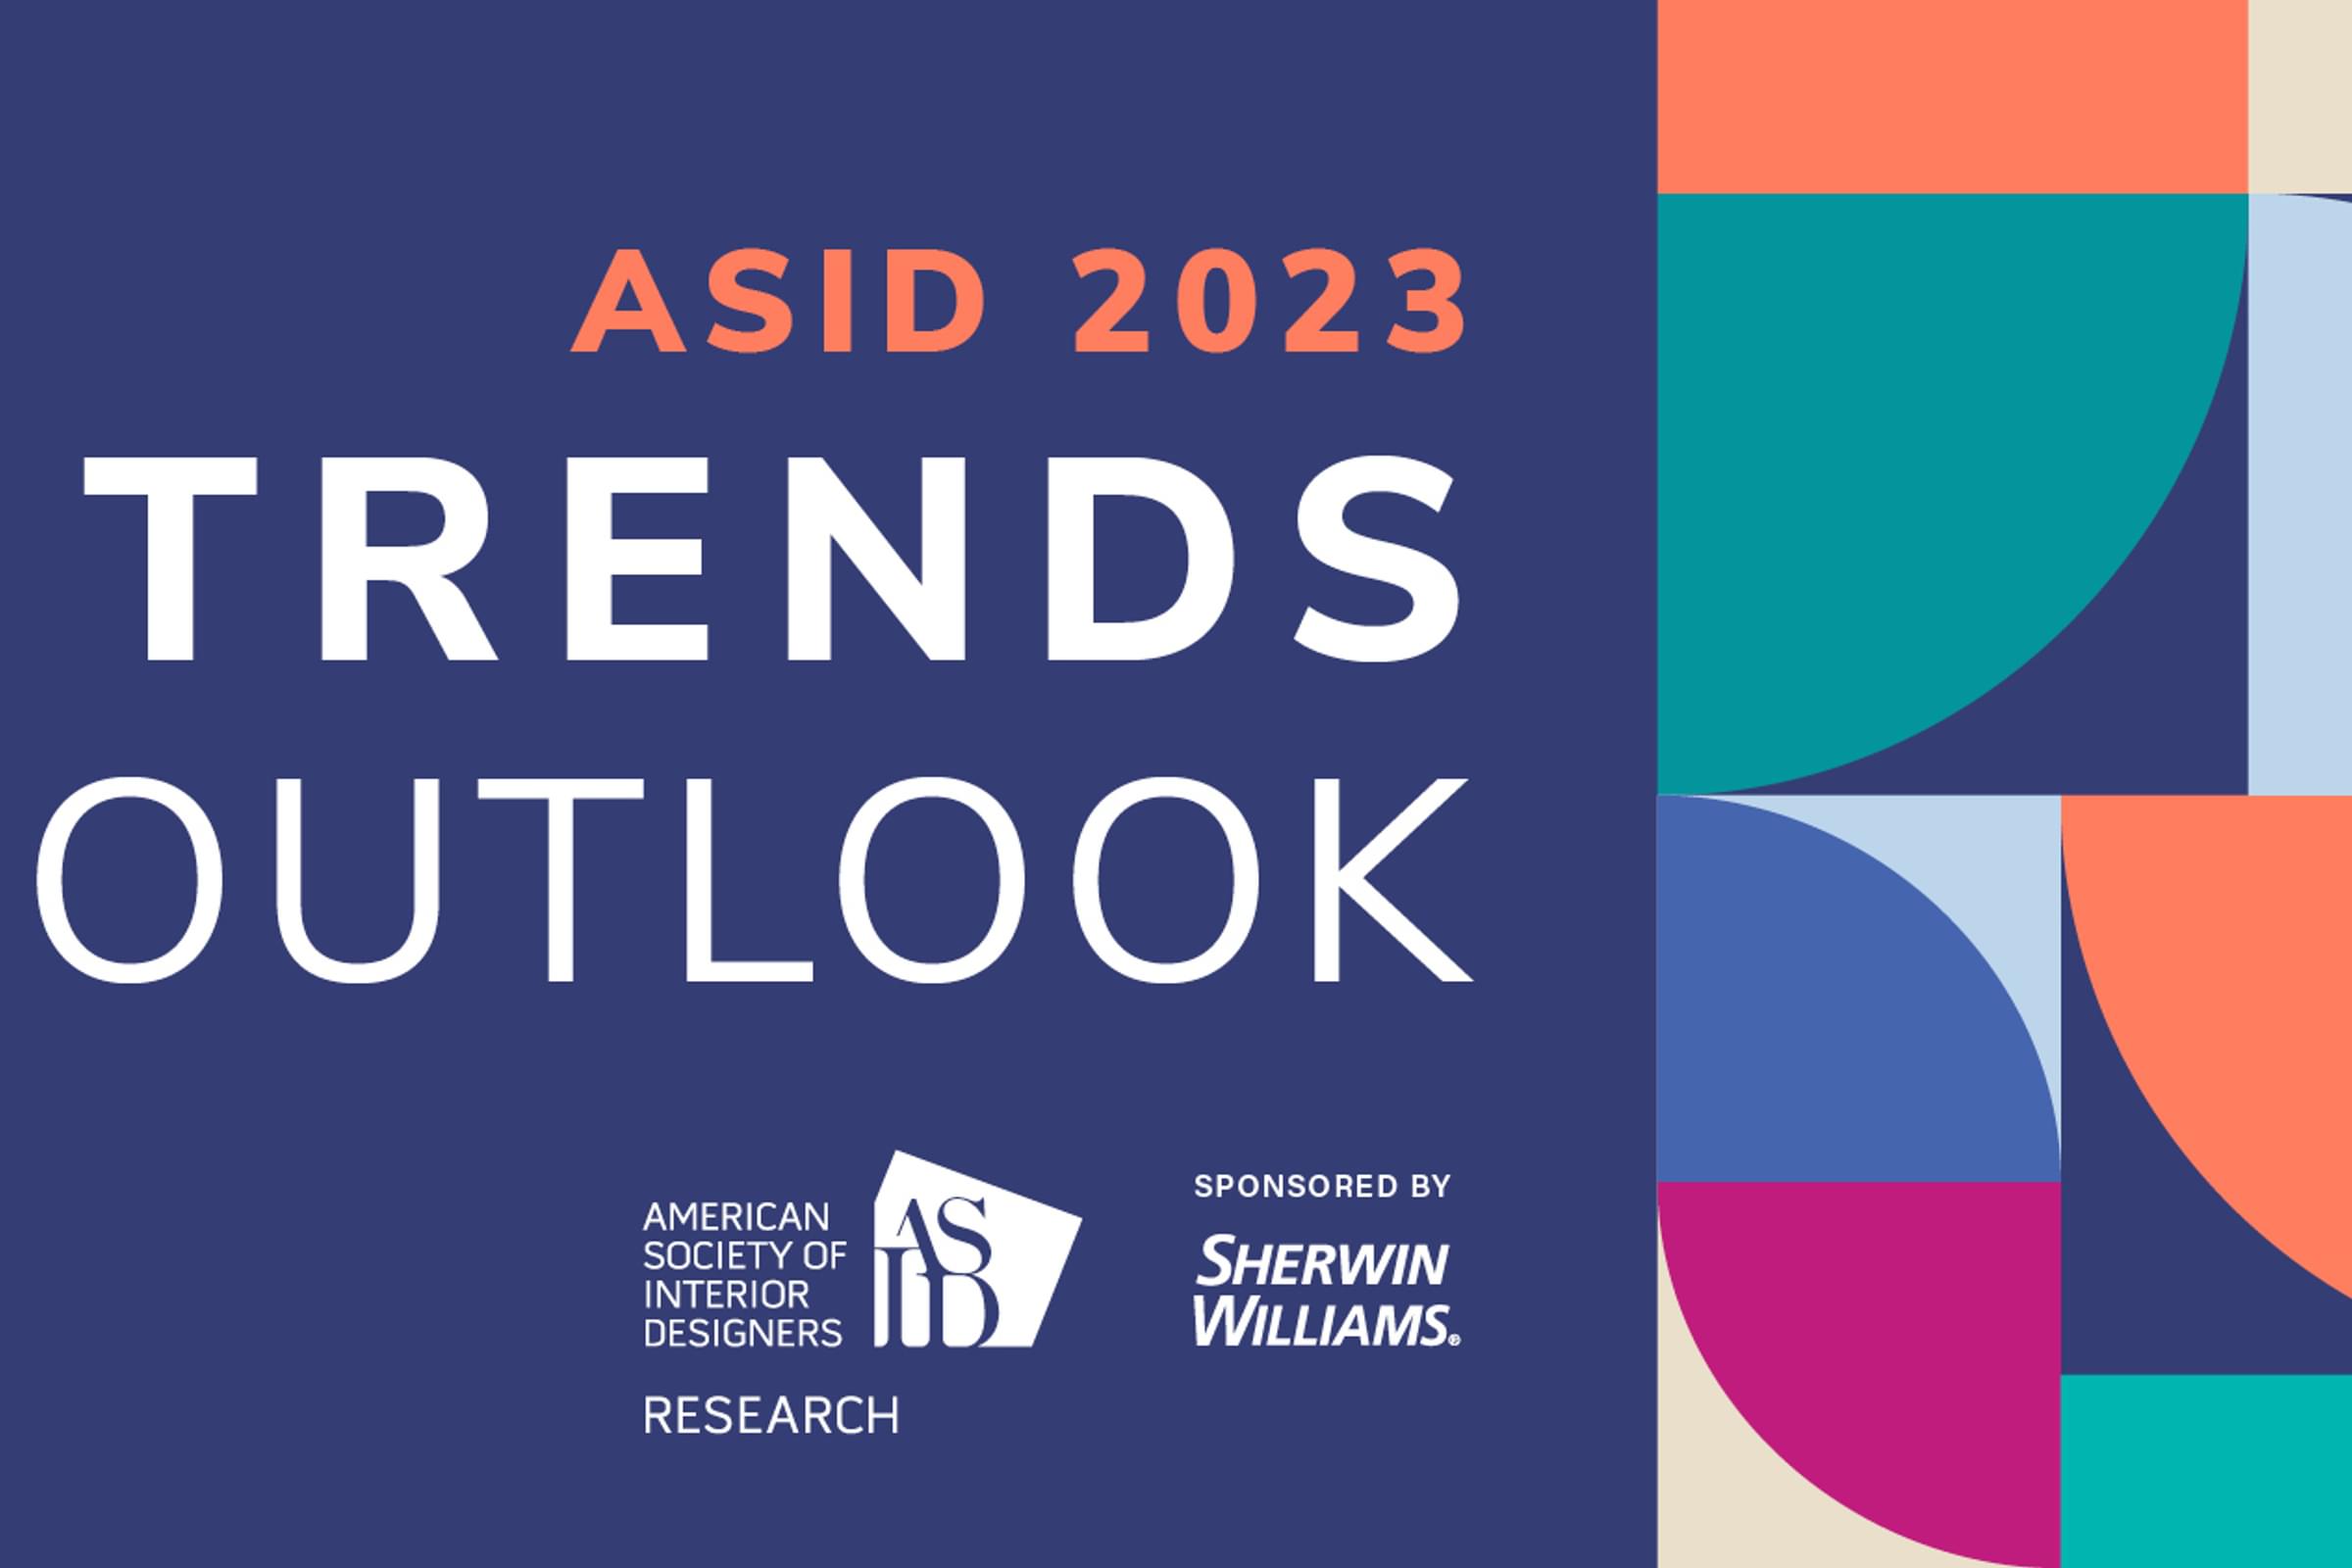 ASID 2023 Trends Outlook American Society  of Interior Designers Research Sponsored by Sherwin Williams